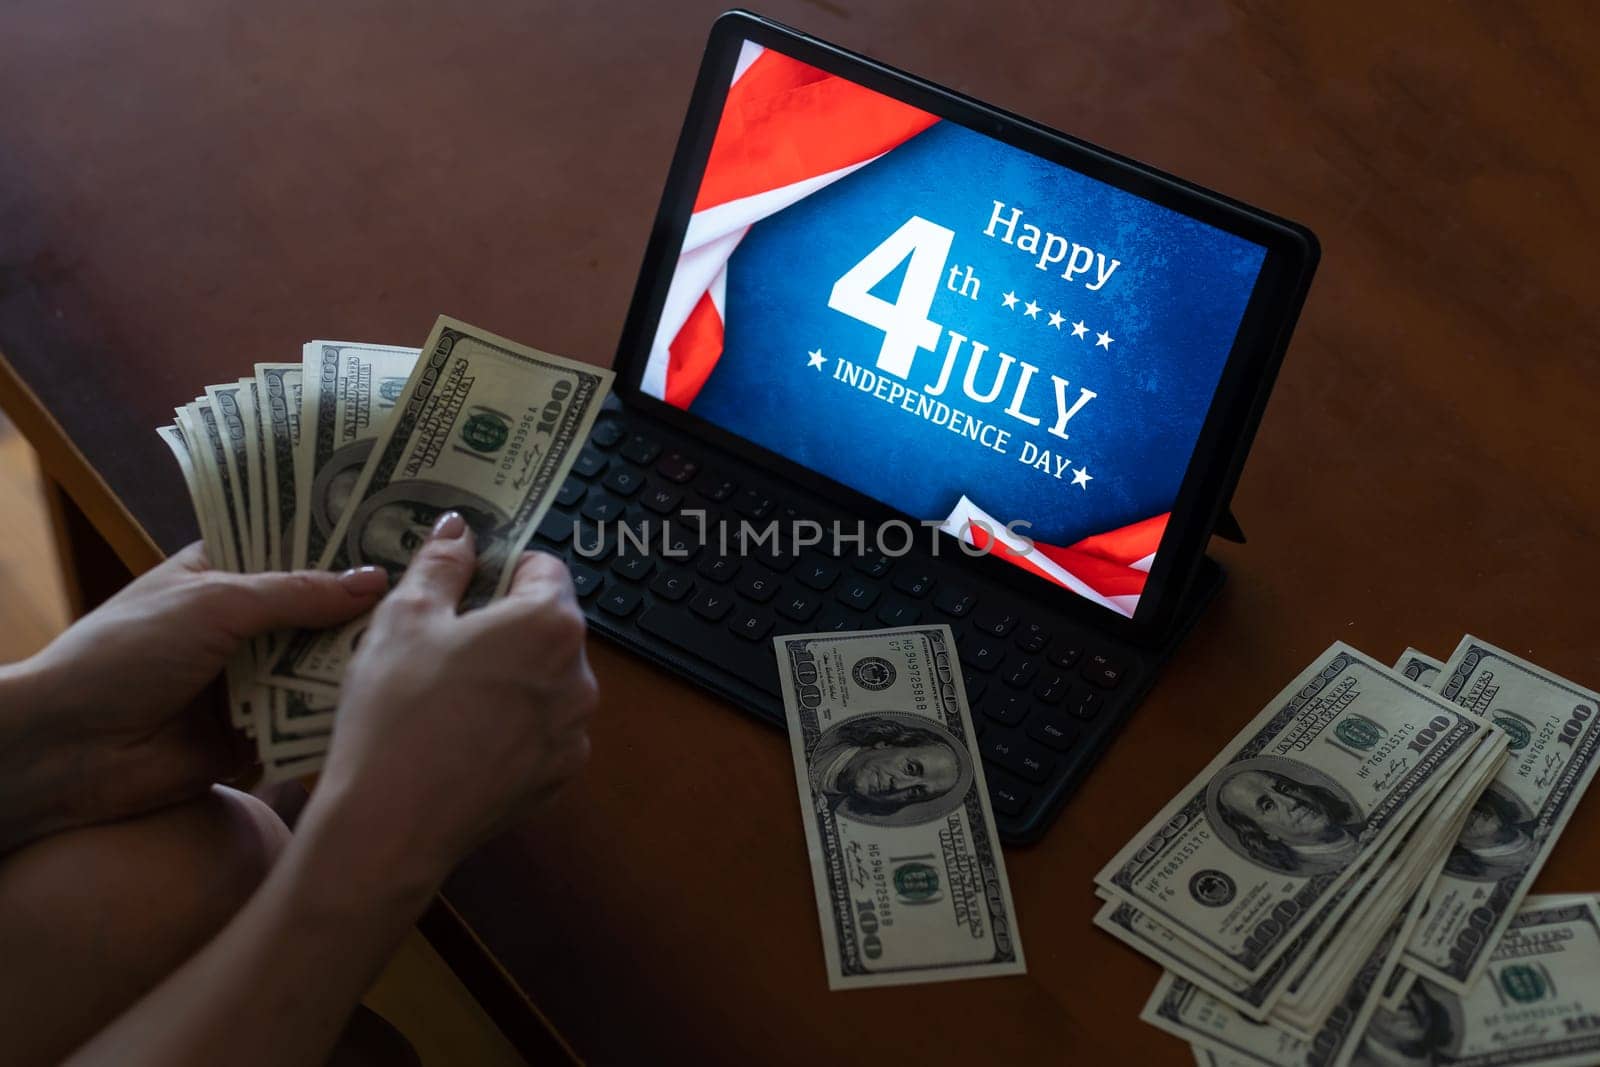 woman holding dollar money and usa flag on tablet.